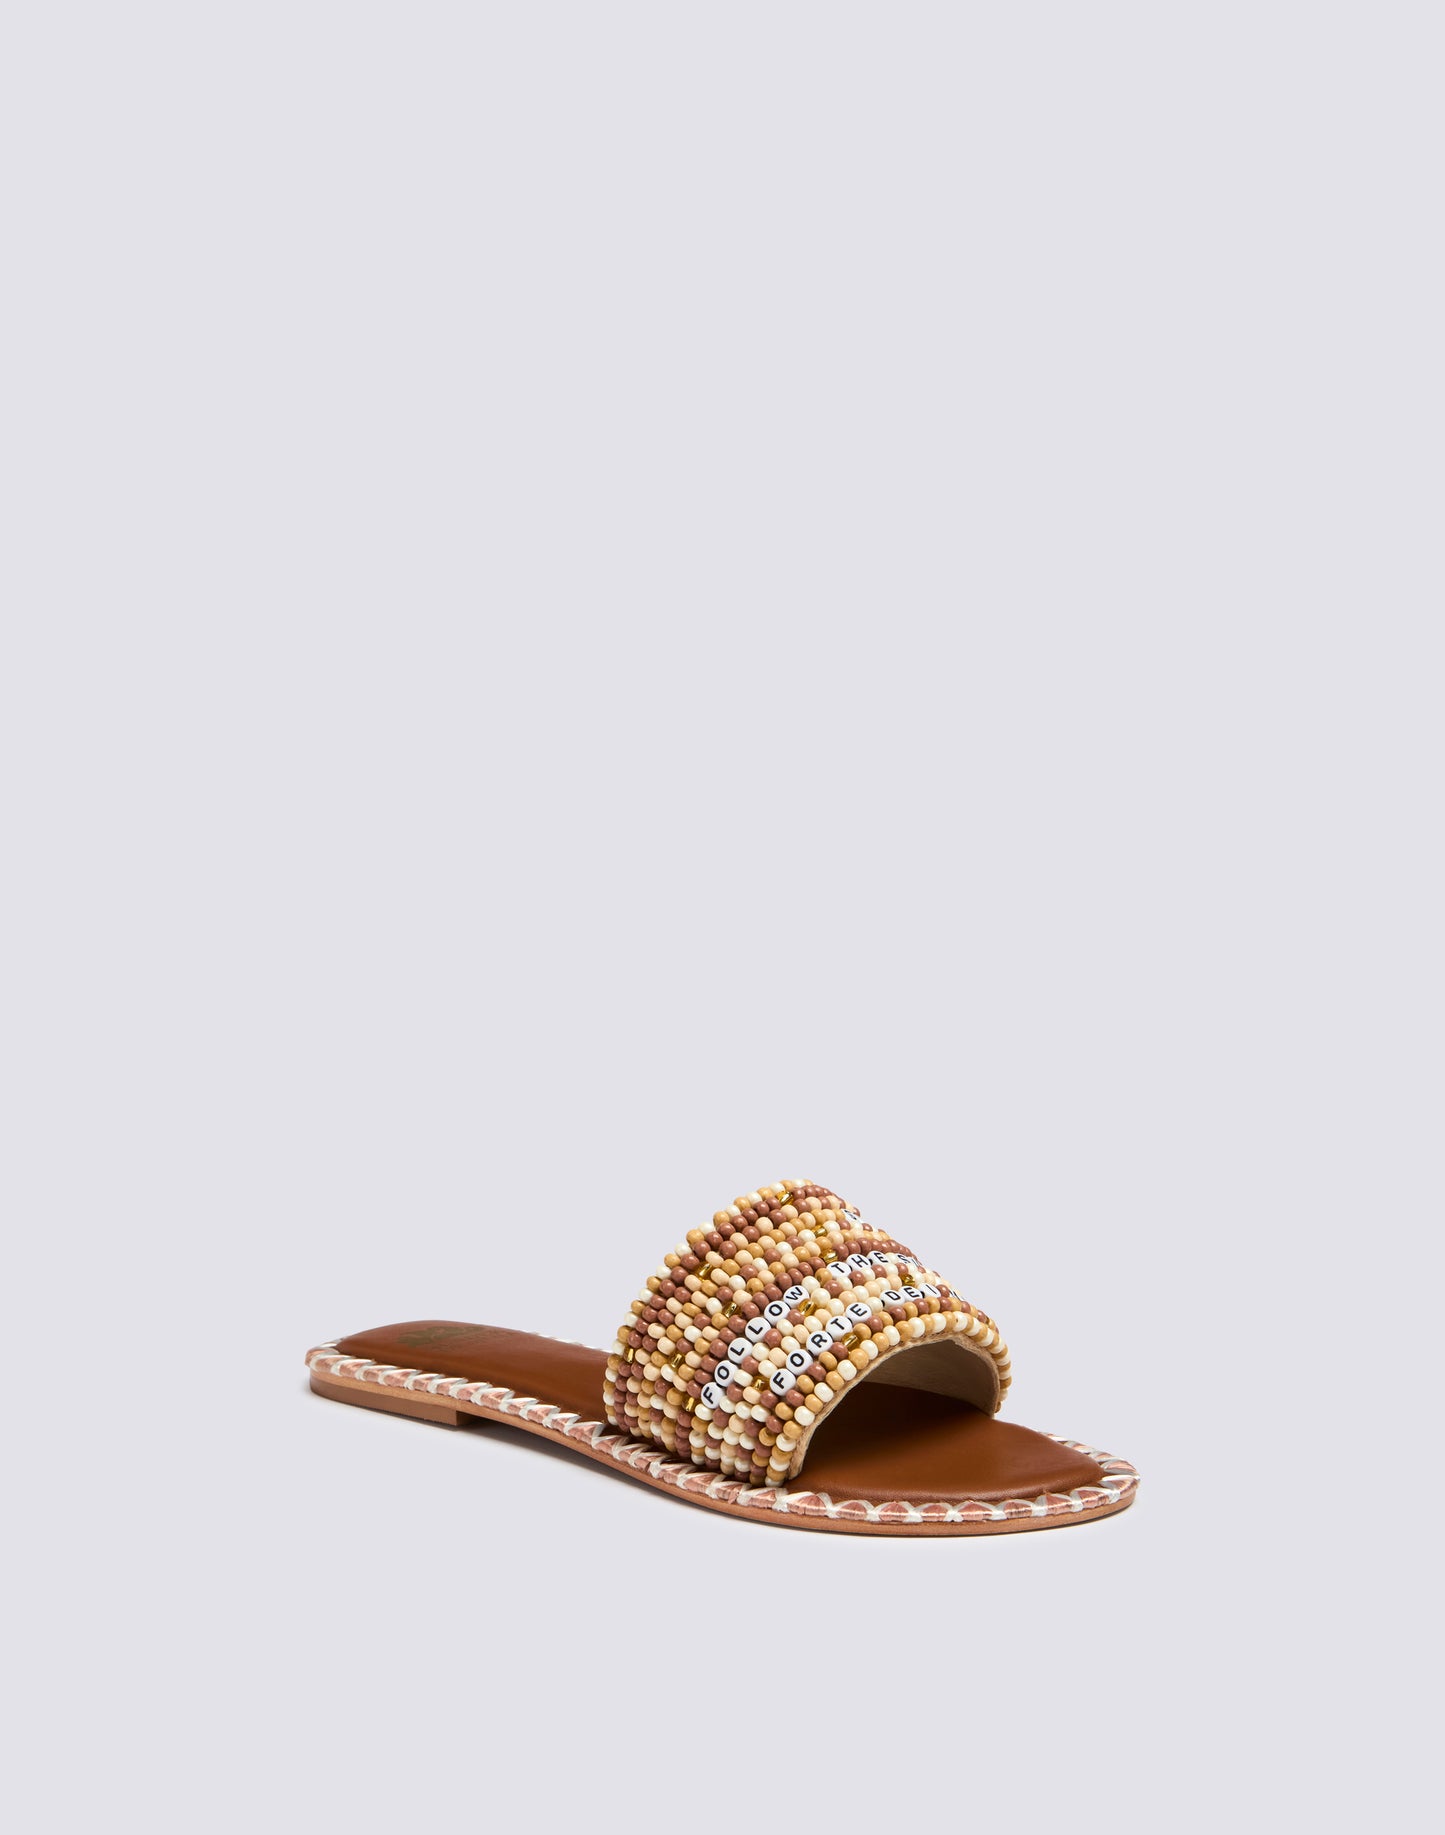 BAND SLIPPERS EMBROIDERED WITH FORTE DEI MARMI BEADS